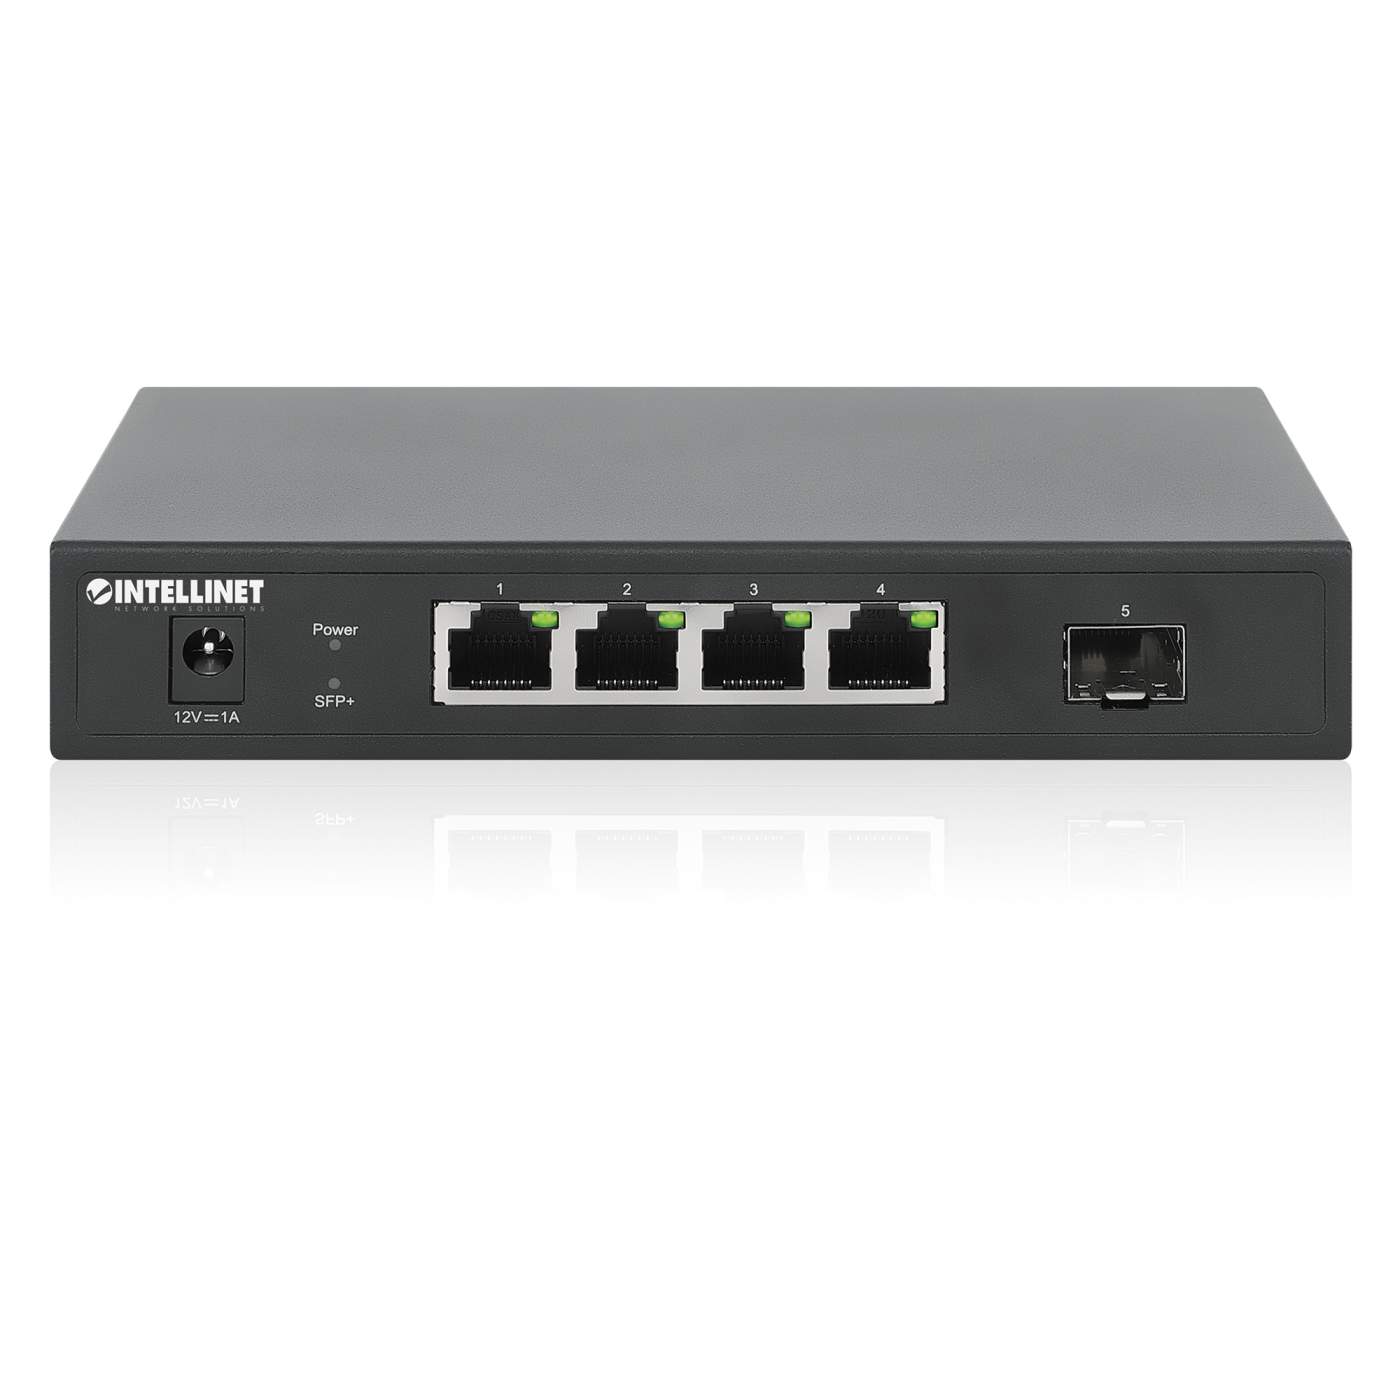 5-Port Switch with 4 x 2.5G Ethernet Ports and 1 SFP+ Uplink Image 6